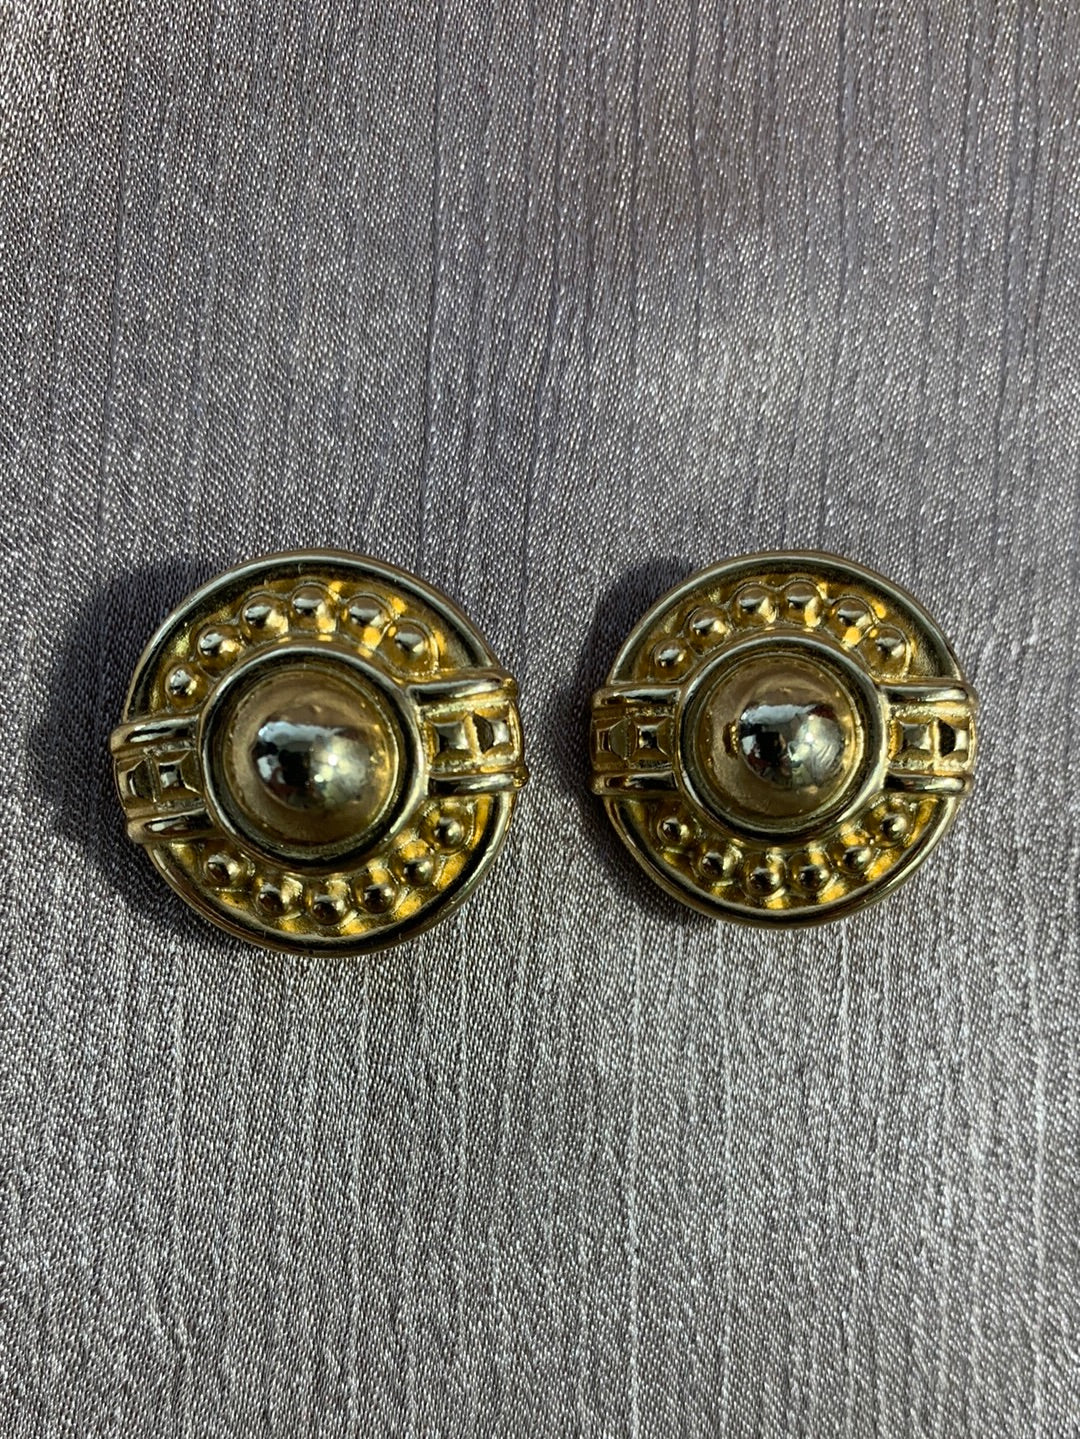 Vintage - GIVENCHY gold tone Round Dome Signed Clip Earrings - 1"